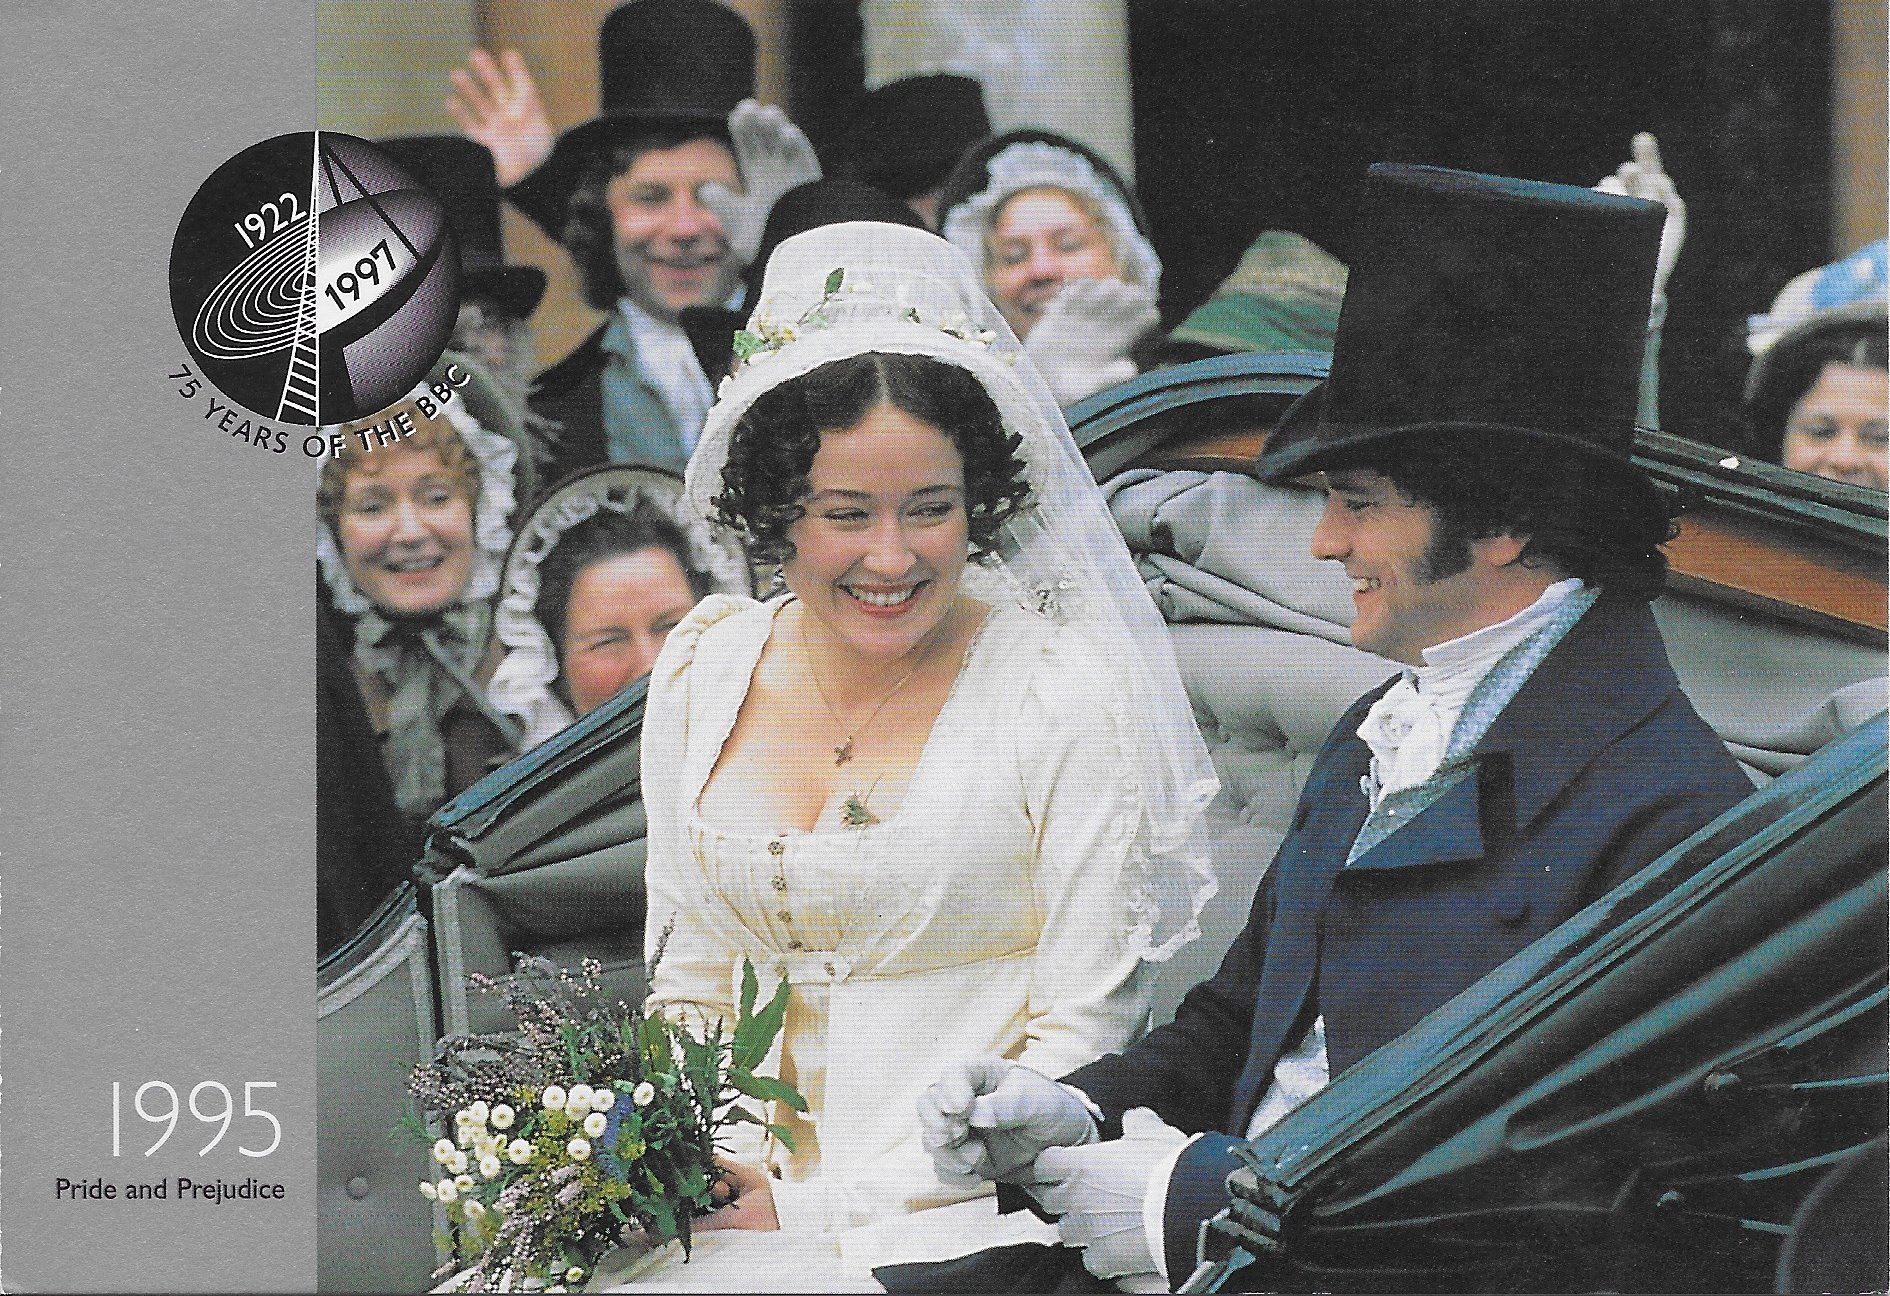 Picture of PC-BBC75-1995 75 years of the BBC - Pride and prejudice by artist Unknown from the BBC postcards - Records and Tapes library